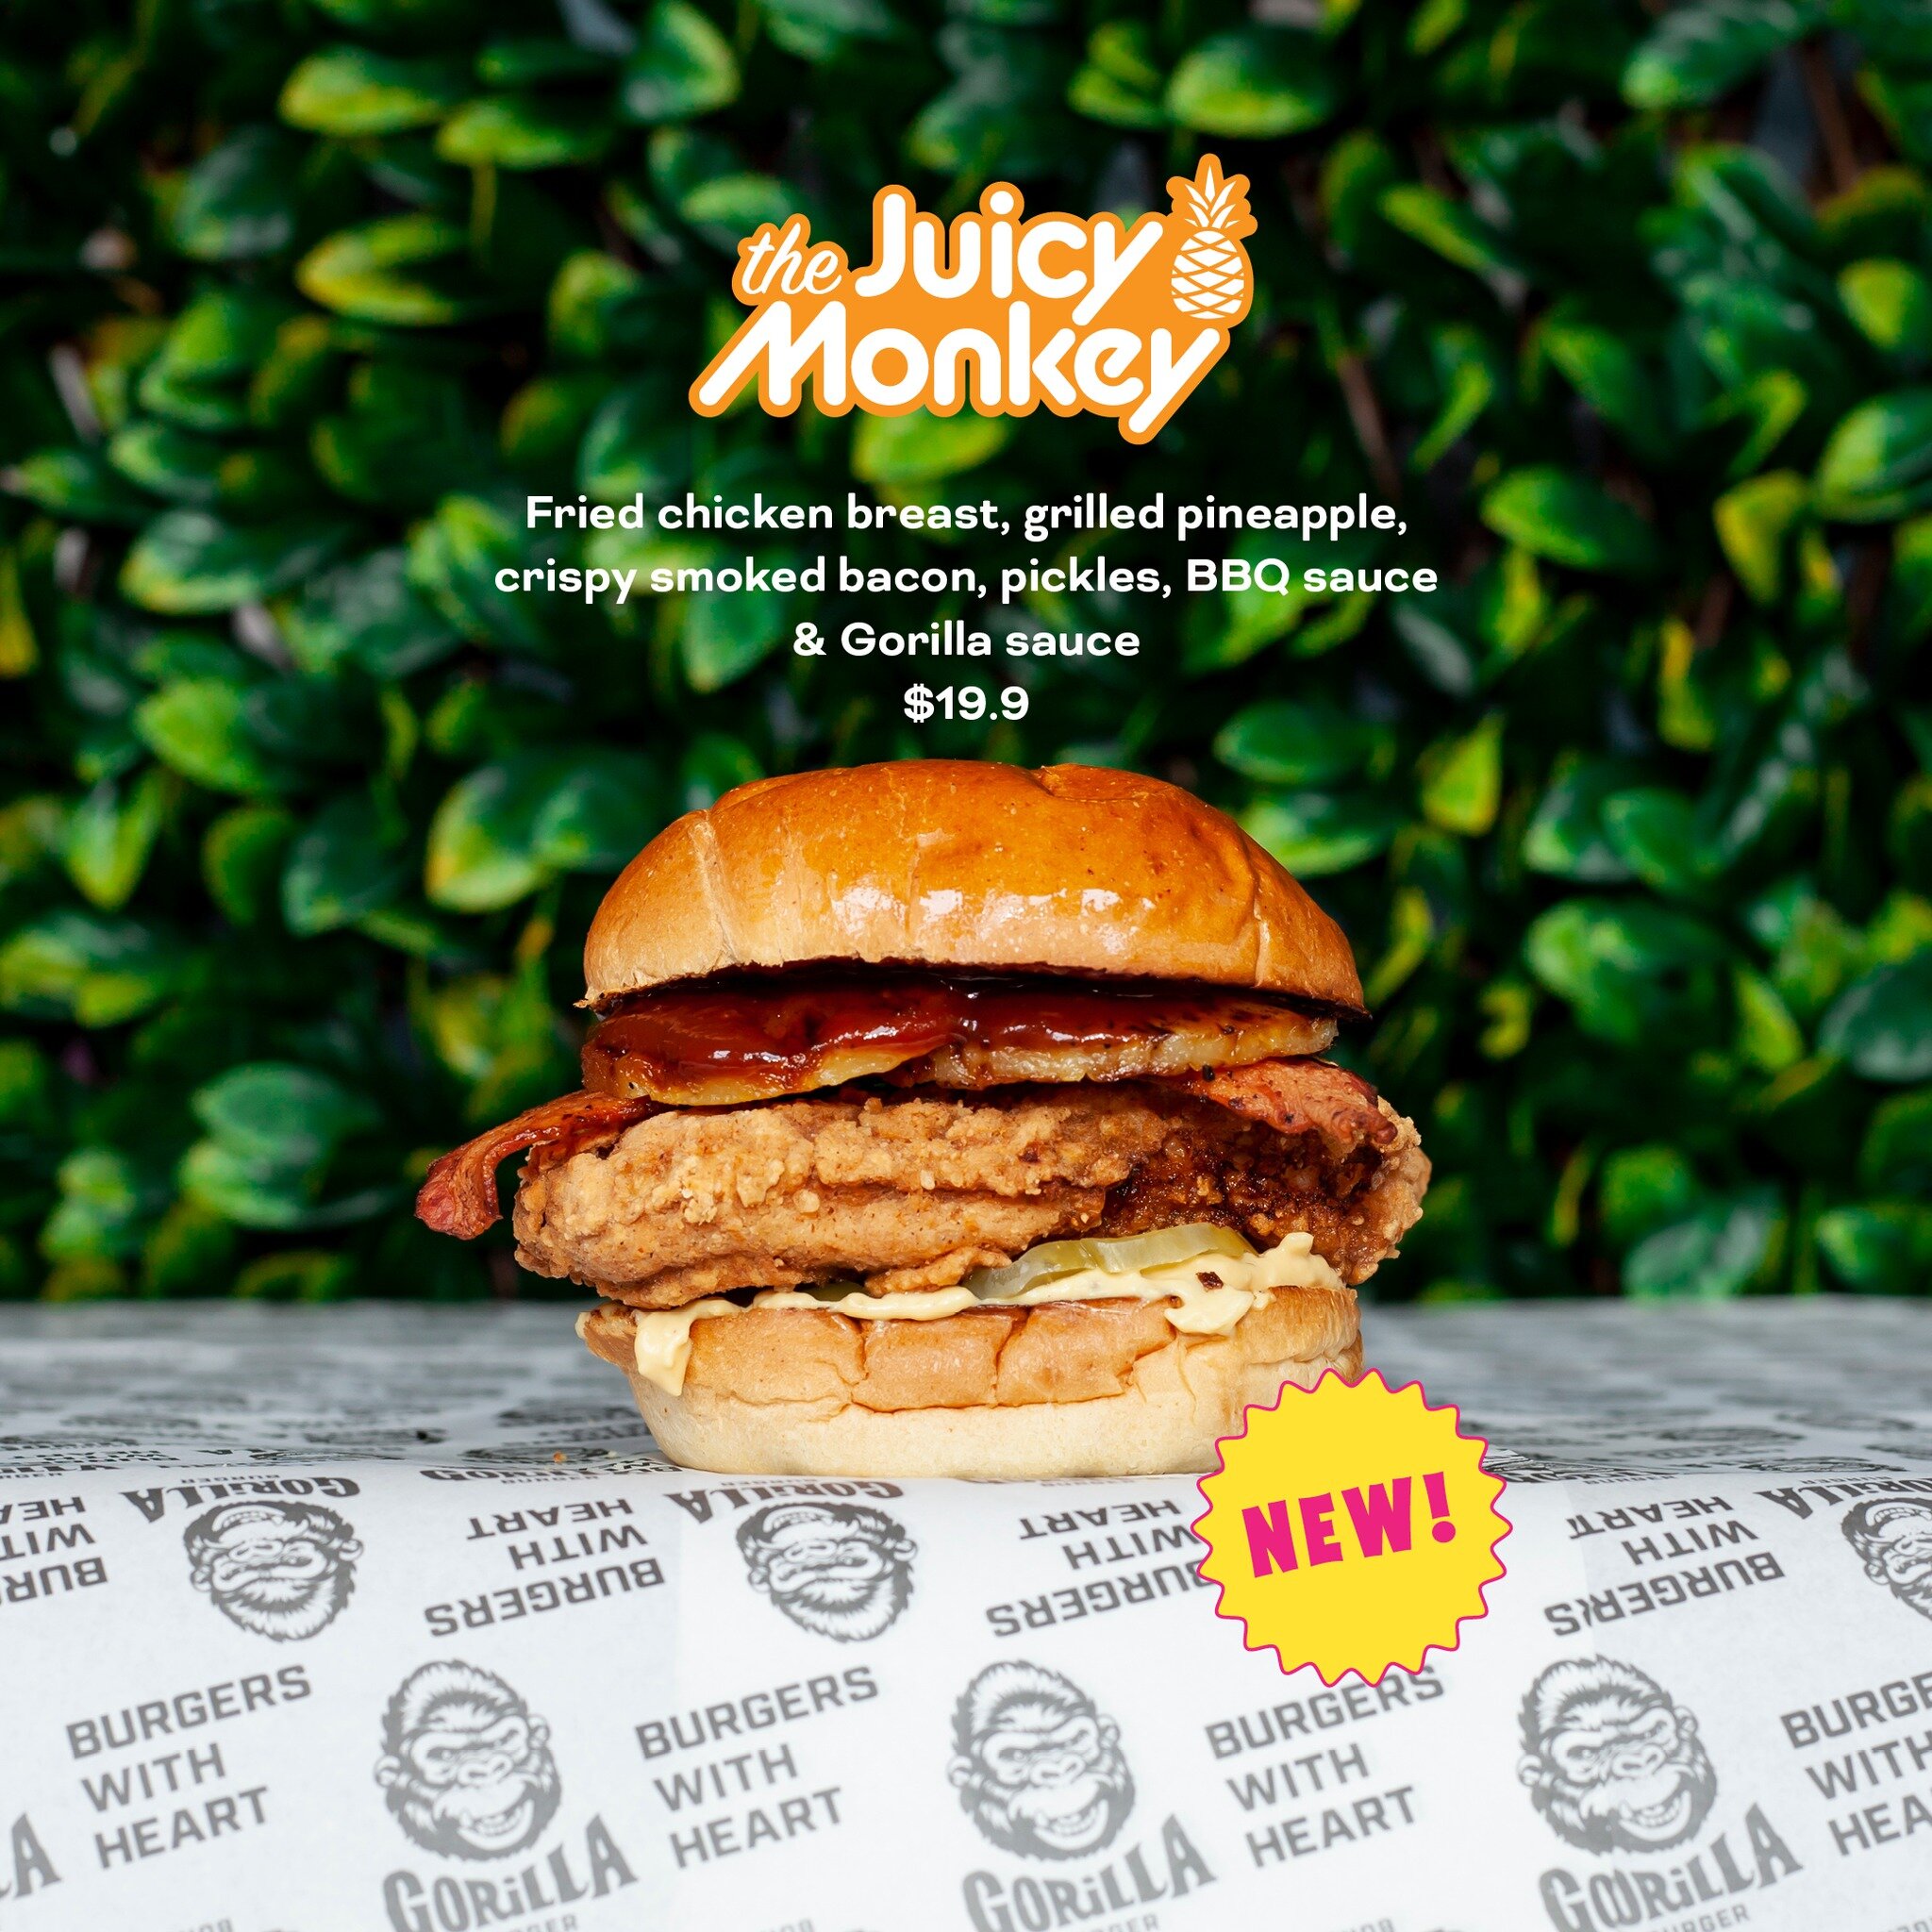 Help us welcome a new member of our permanent menu! 🍍🍍THE JUICY MONKEY 🍍🍍

Fried chicken, crispy bacon, and grilled pineapple... a combo made in heaven!

Available now!